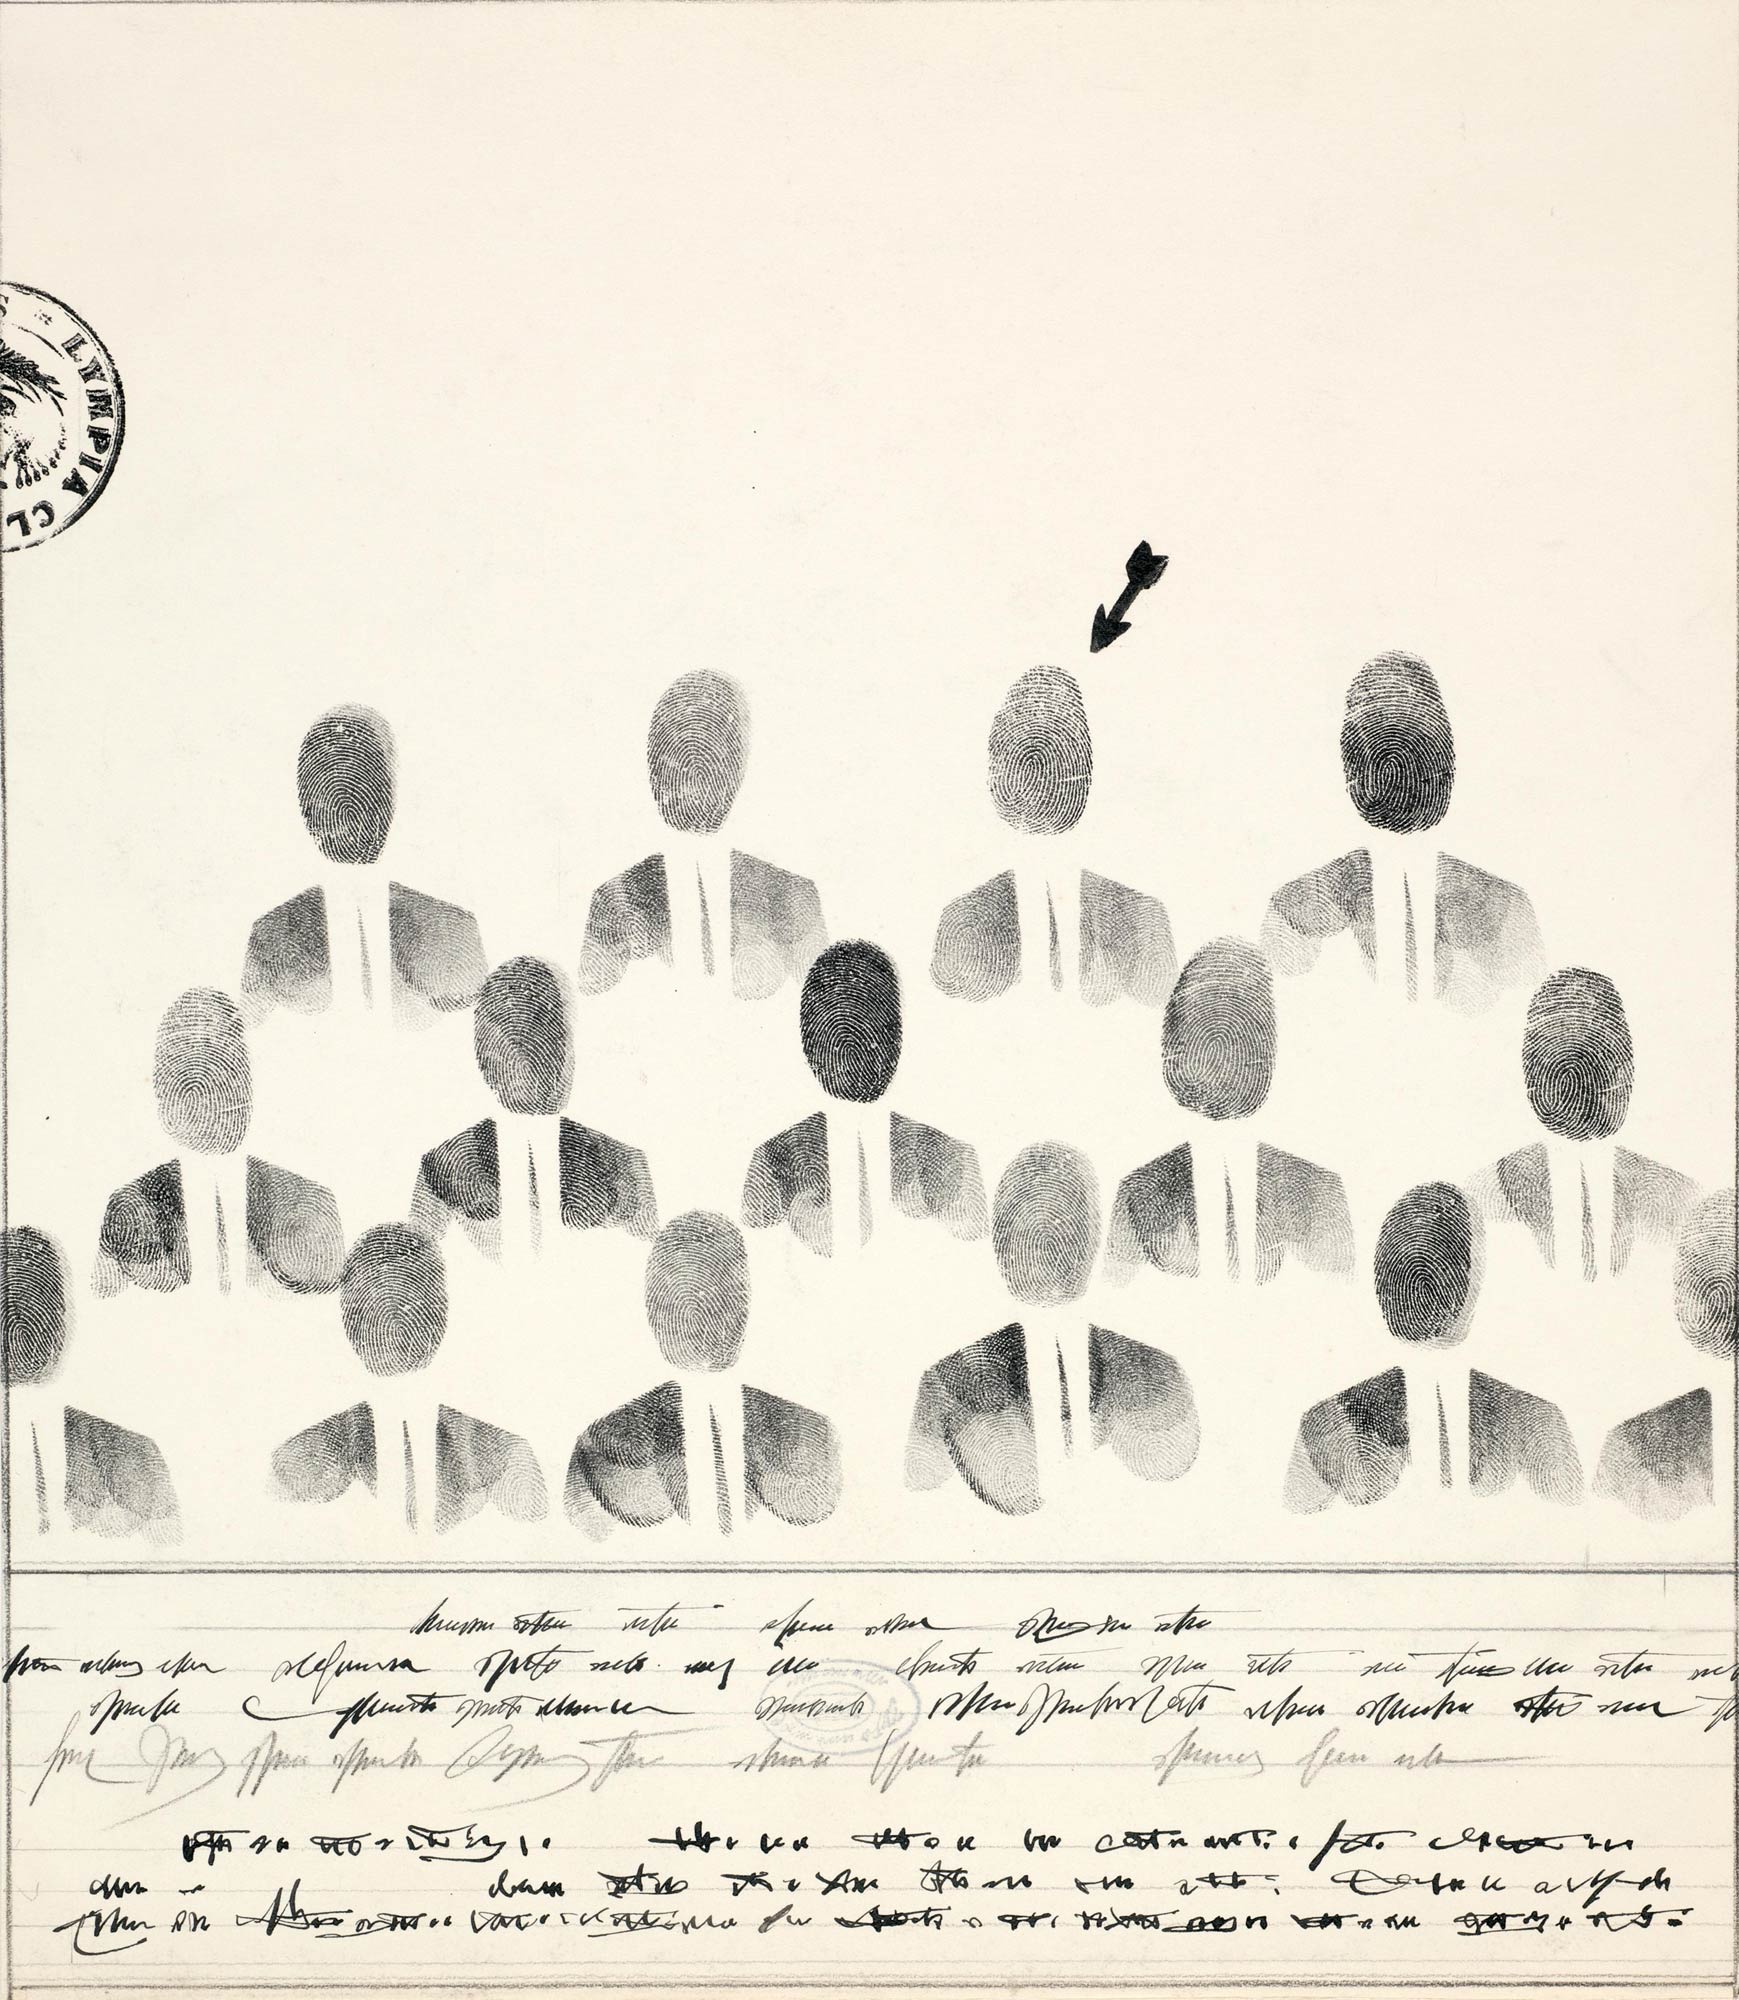 <em>Group Photo</em>, 1953. Ink, fingerprints, and rubber stamp on paper, 14 x 11 in. Collection of Richard and Ronay Menschel.